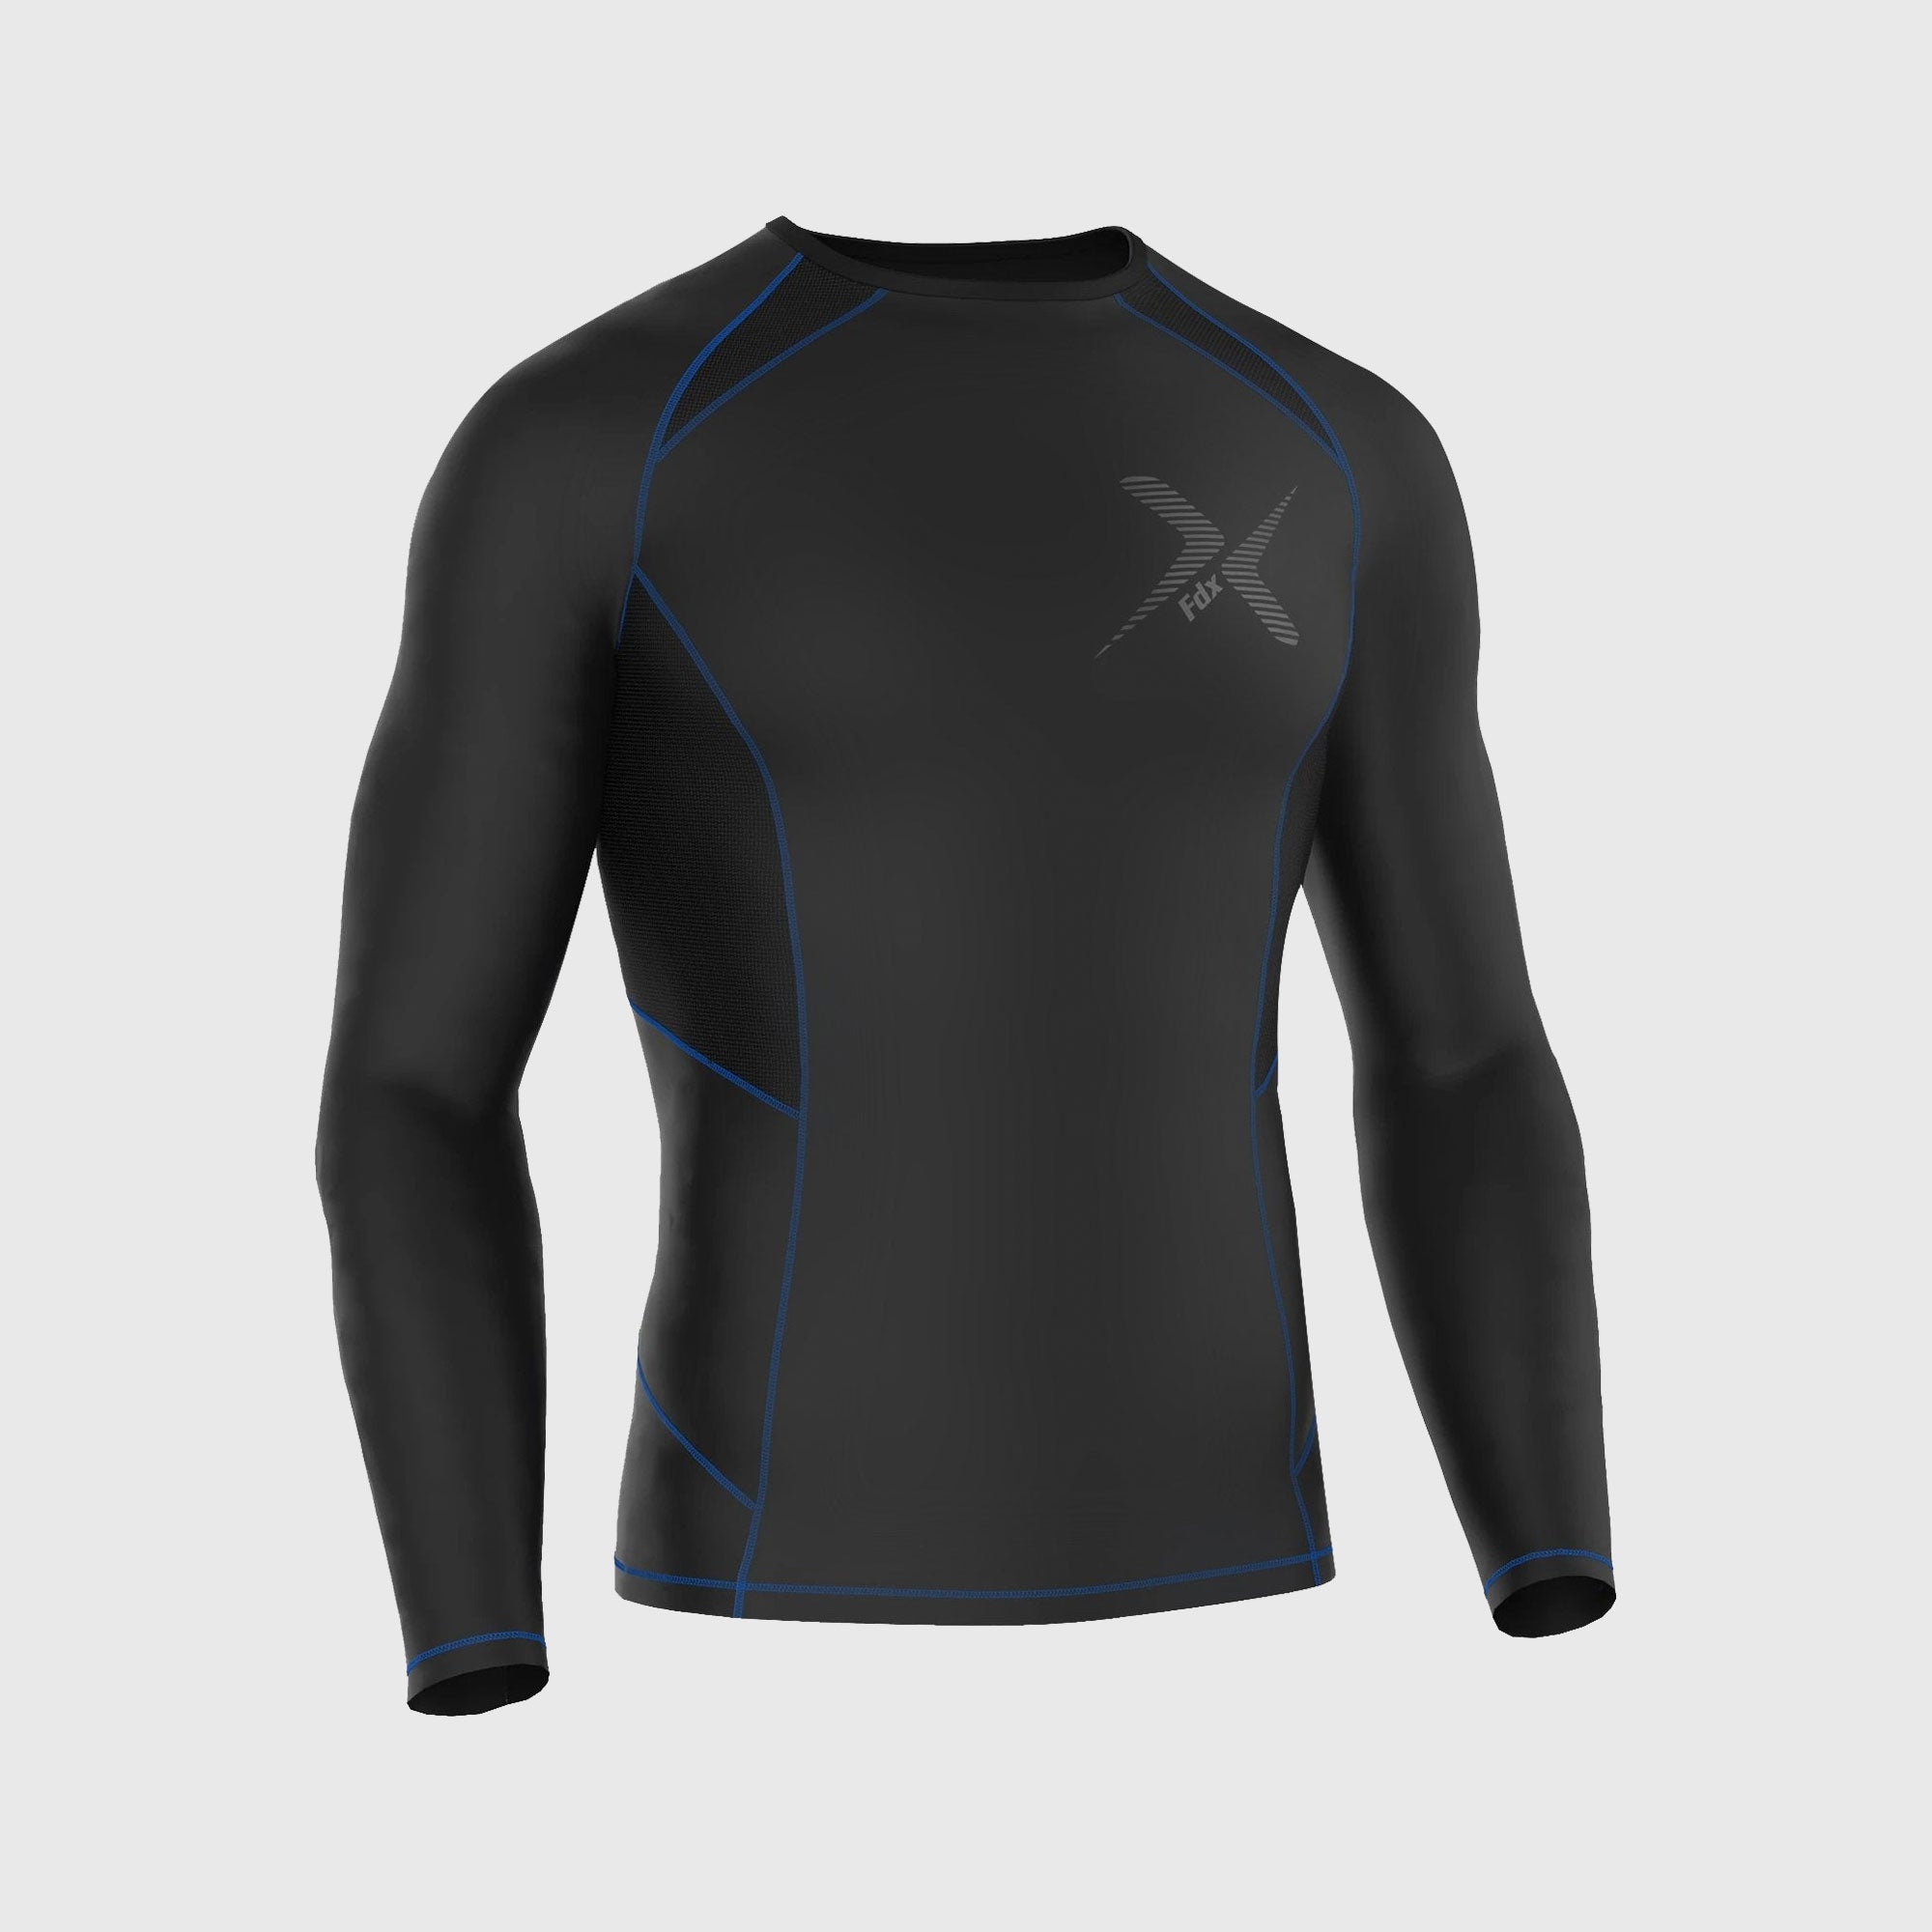 Fdx Best Men's Black & Blue Long Sleeve Compression Top Running Gym Workout Wear Rash Guard Stretchable Breathable - Recoil